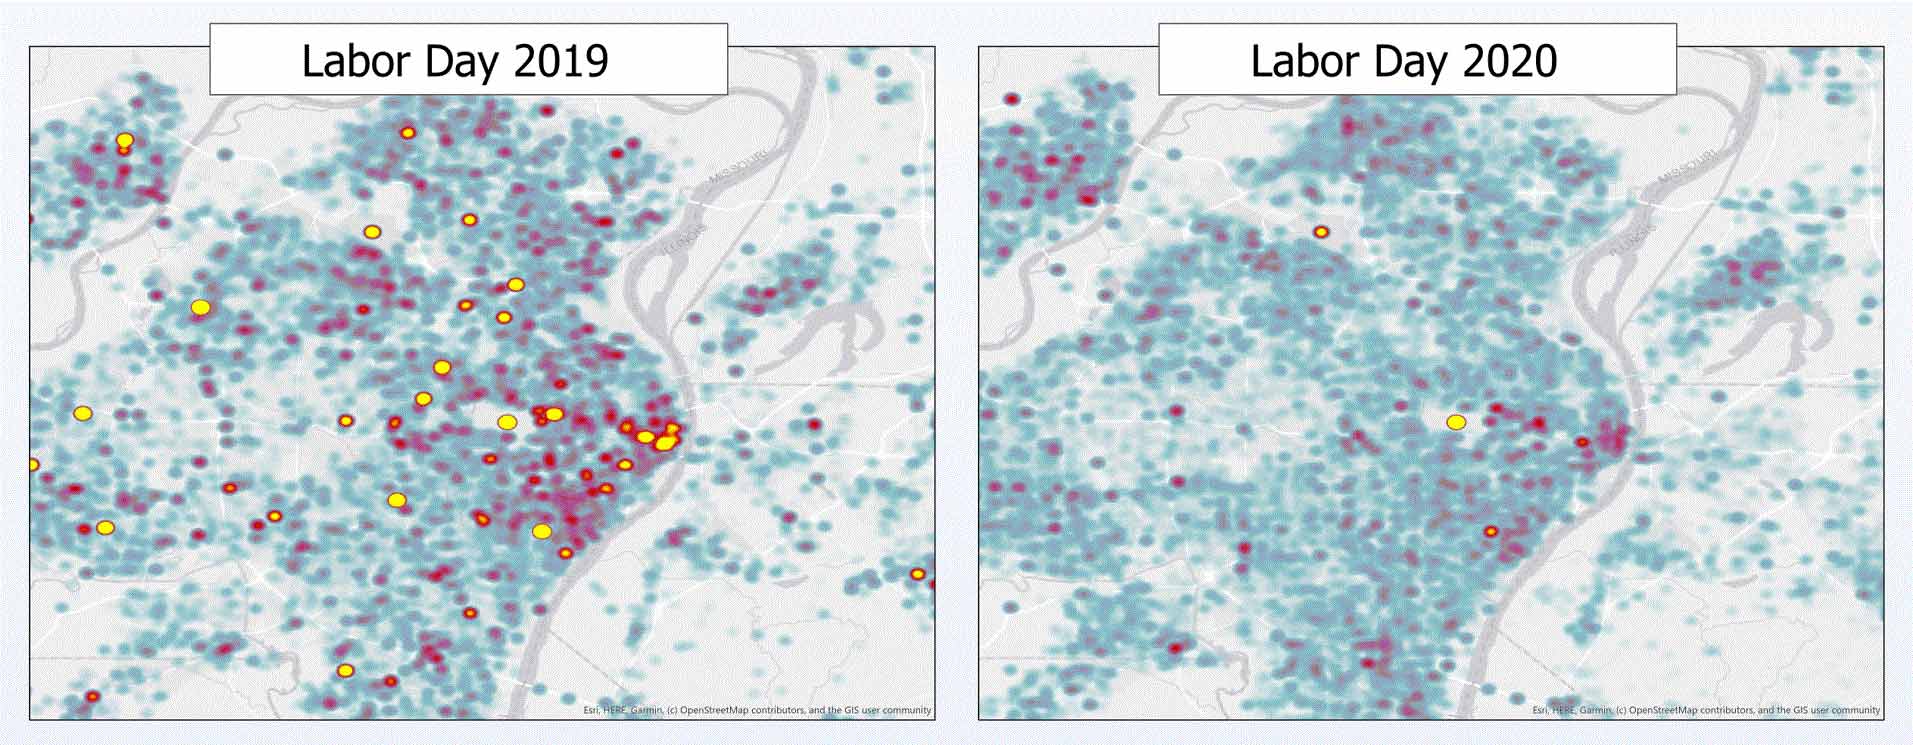 These two maps of the St. Louis area depict cellphone geolocation "pings" on Labor Day in 2019 and 2020. In 2019, cell phone locations and, by default, people were concentrated in a number of recreational locations throughout the area. In contrast, 2020's map shows that people were more dispersed throughout residential areas, and only congregating in a few locations. 